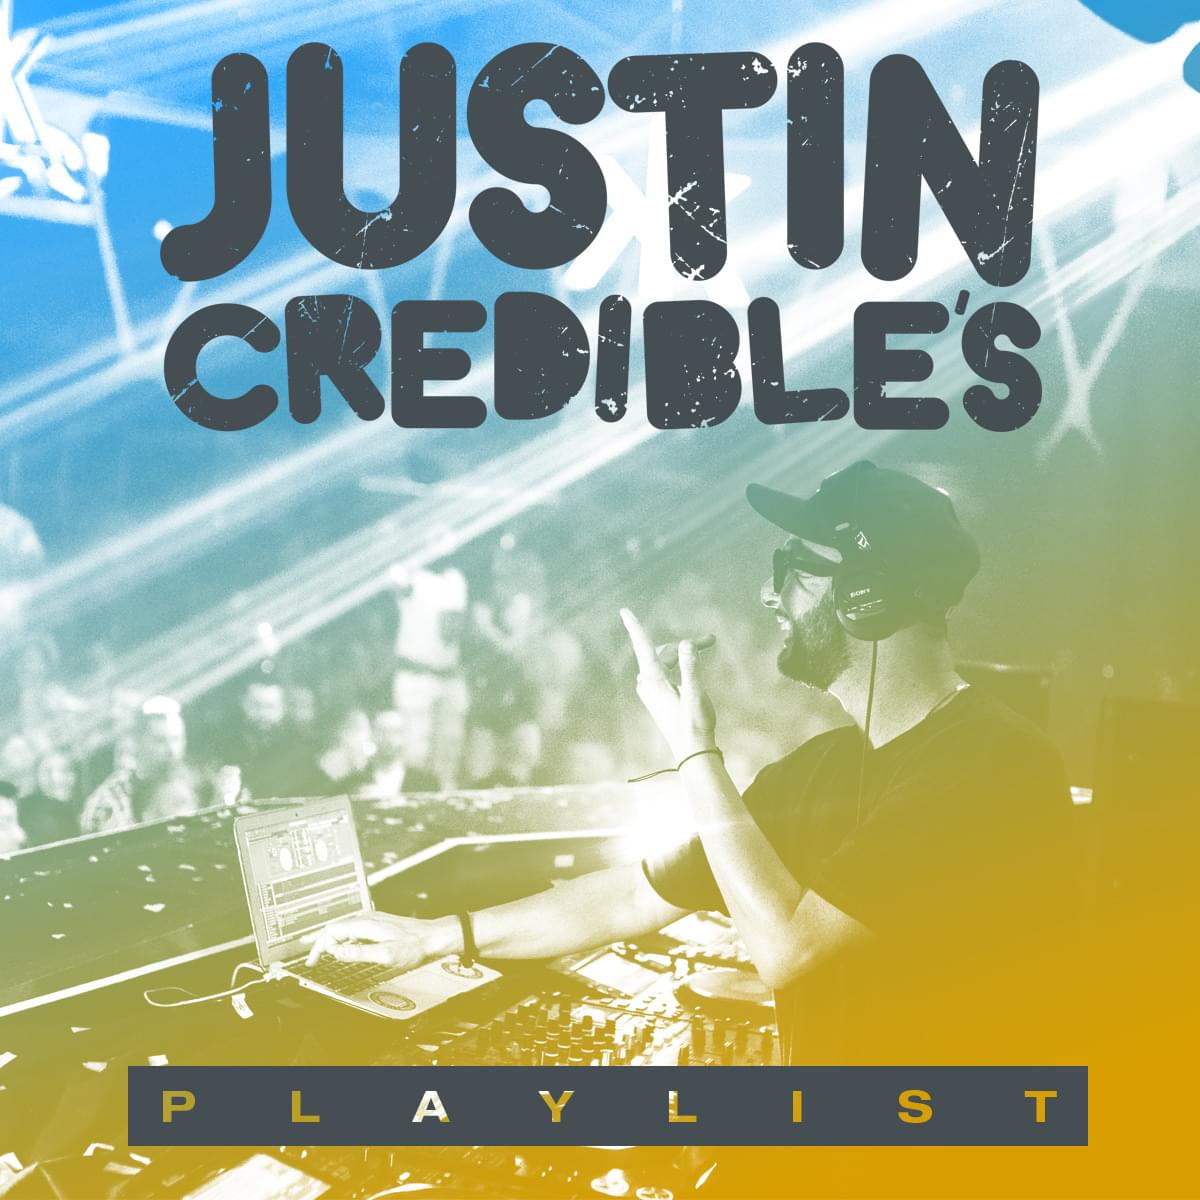 STREAM 10 of the Hottest New Tracks on Just10 Credible’s Playlist